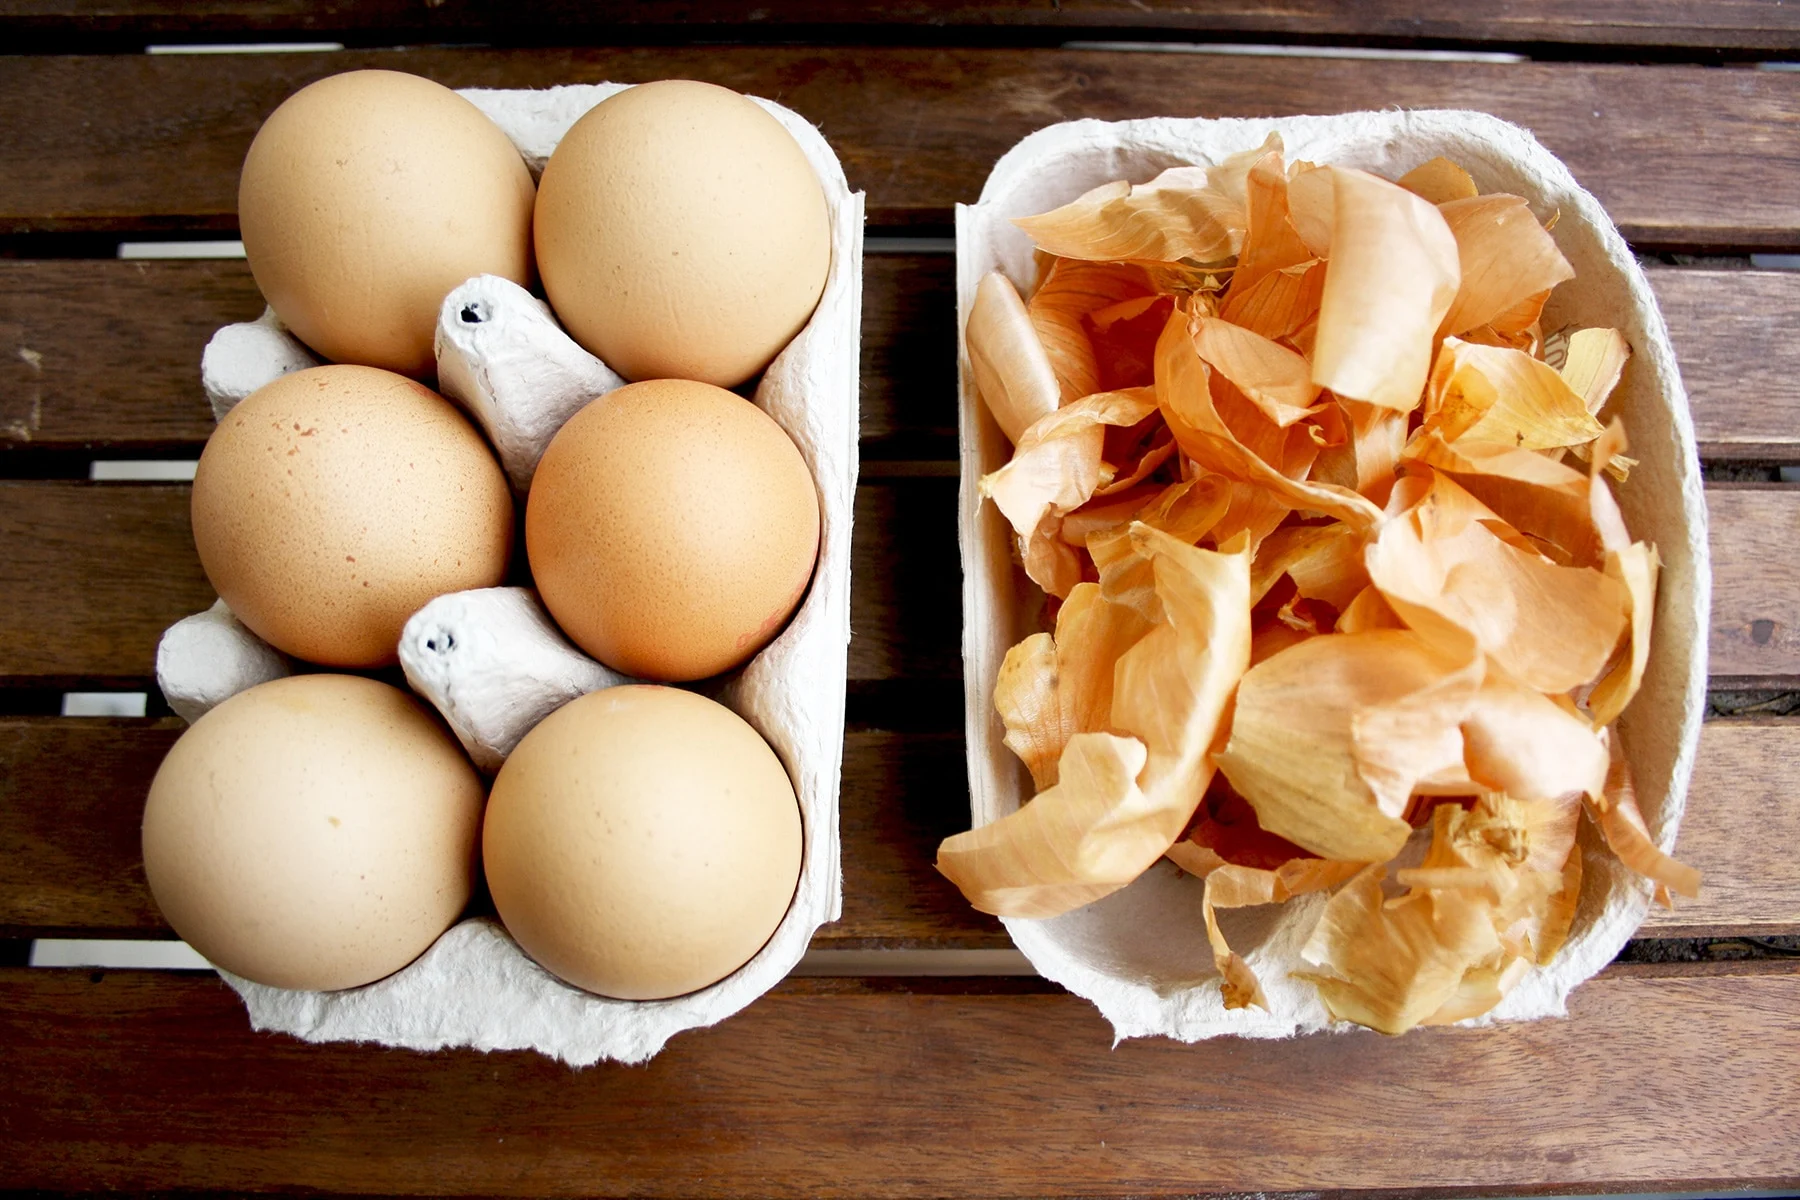 Natural Egg Dye with Onion Skins 5 Ways - Eggs Ingredient Closeup